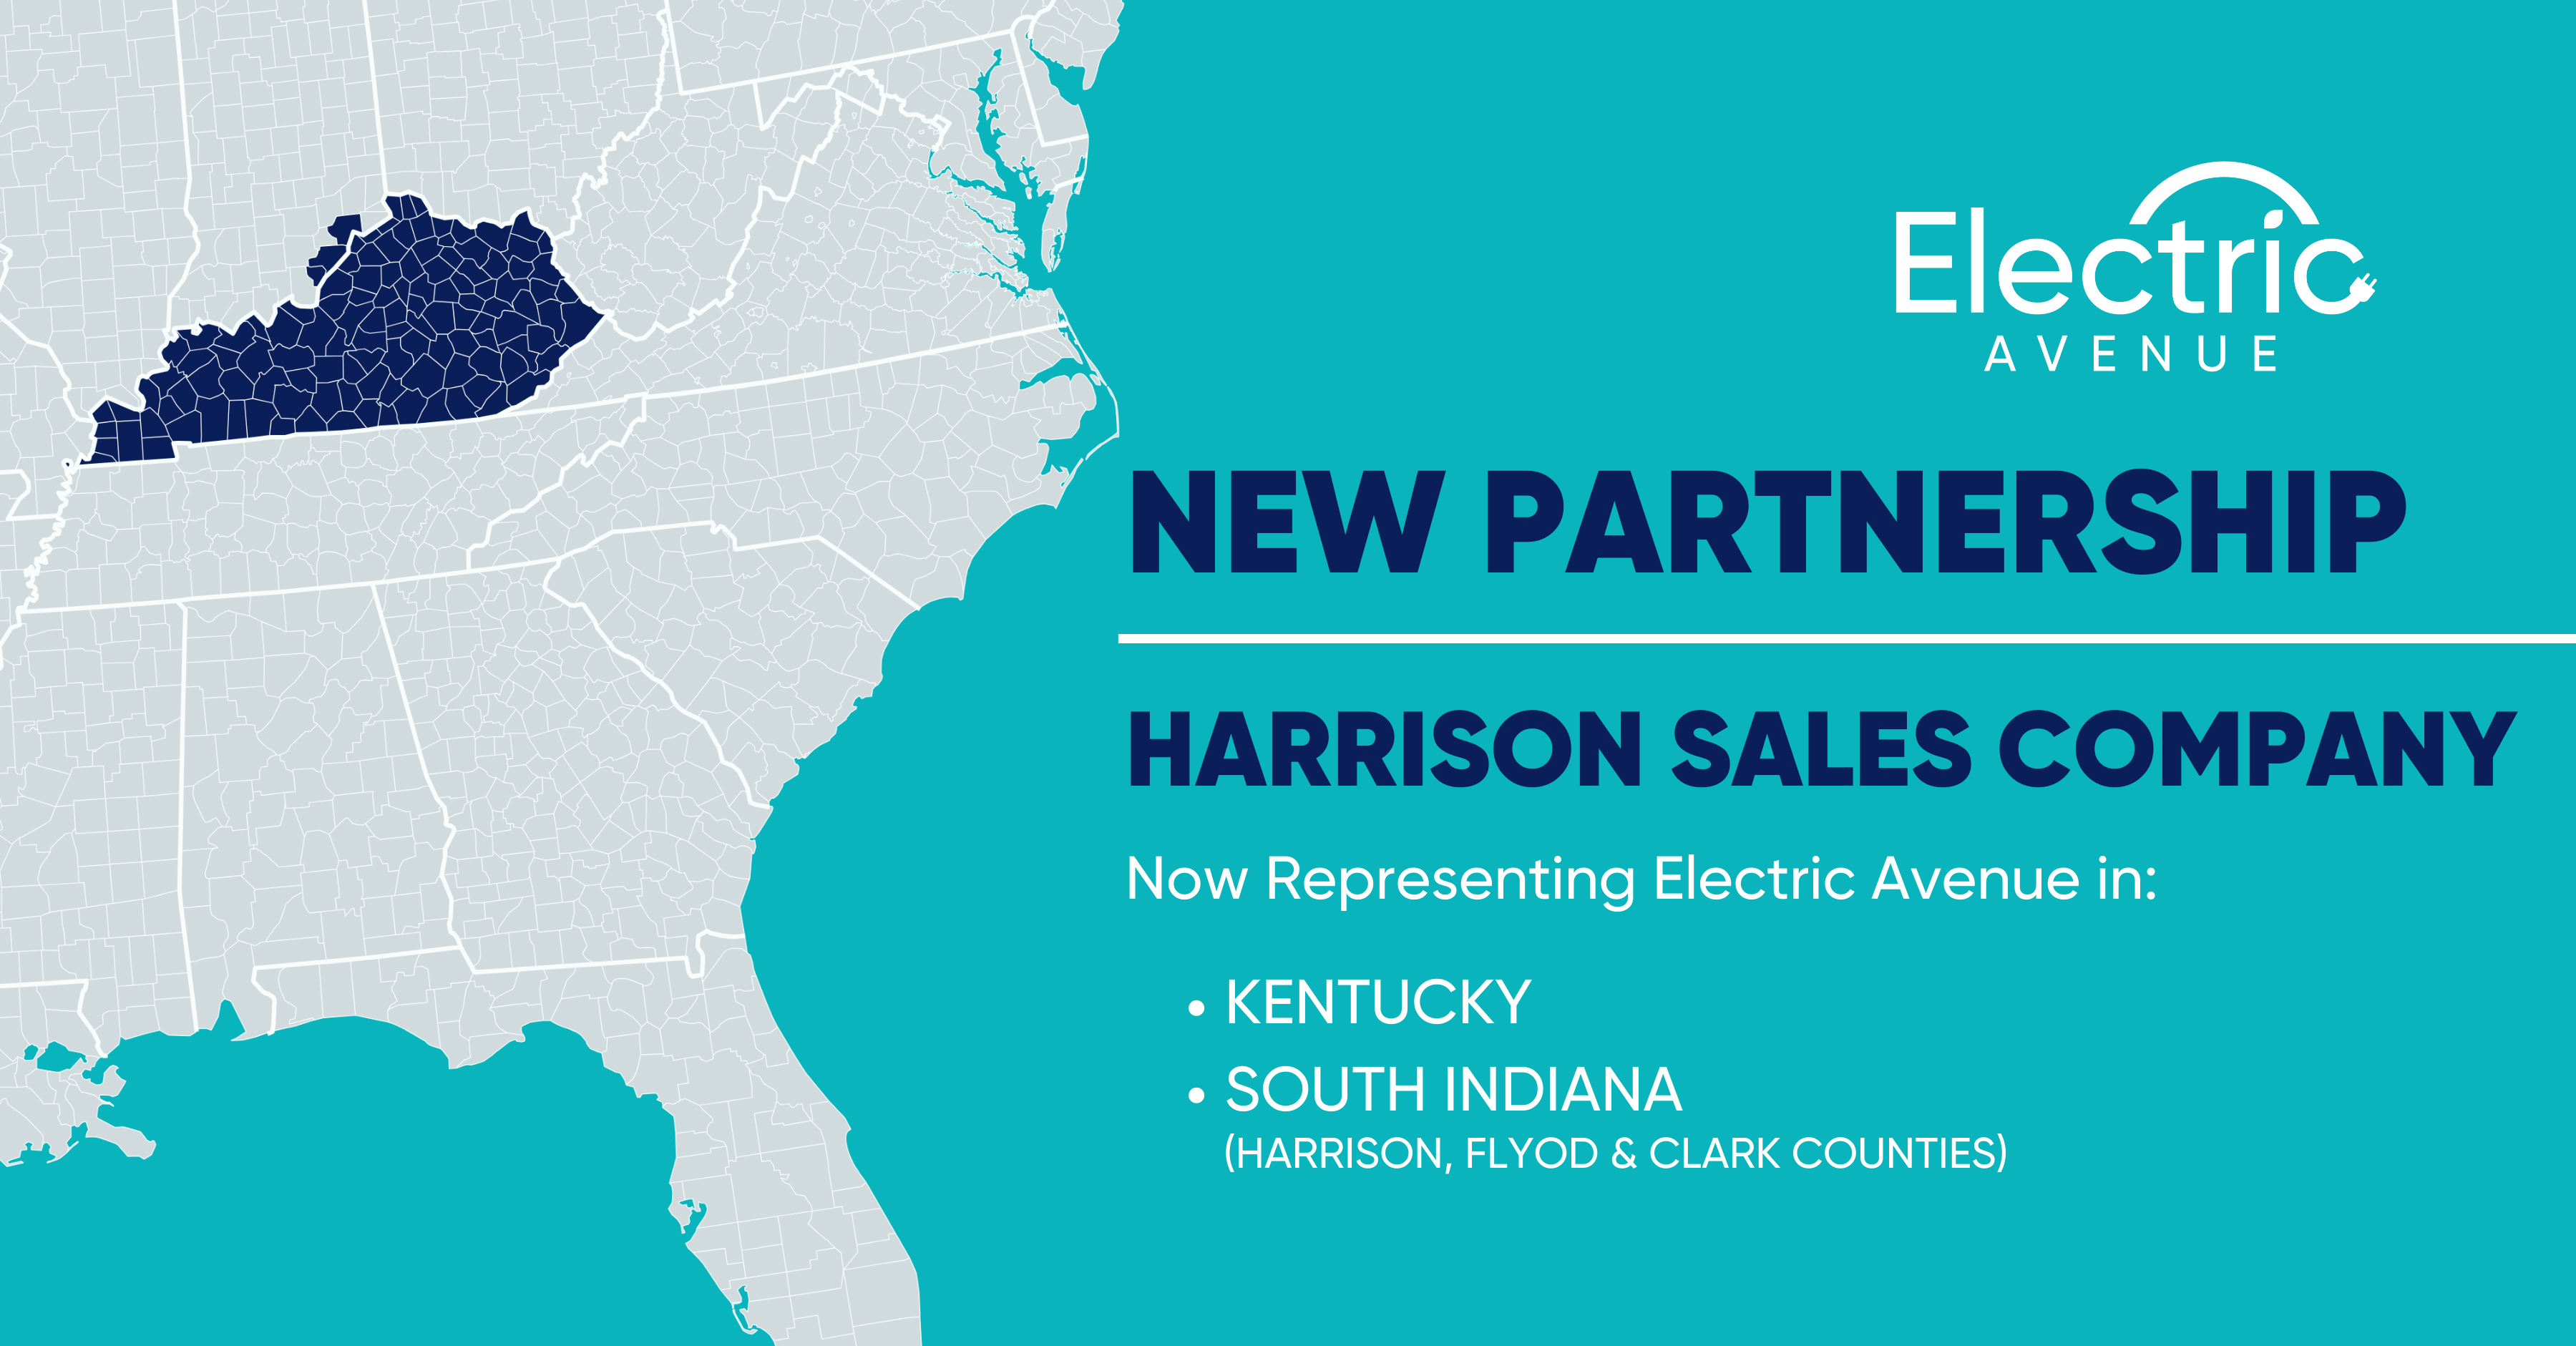 New Partnership with Electric Avenue and Harrison Sales Company. Image depicts a map with text indicating Harrison represents Electric Avenue in Kentucky and lower Indiana